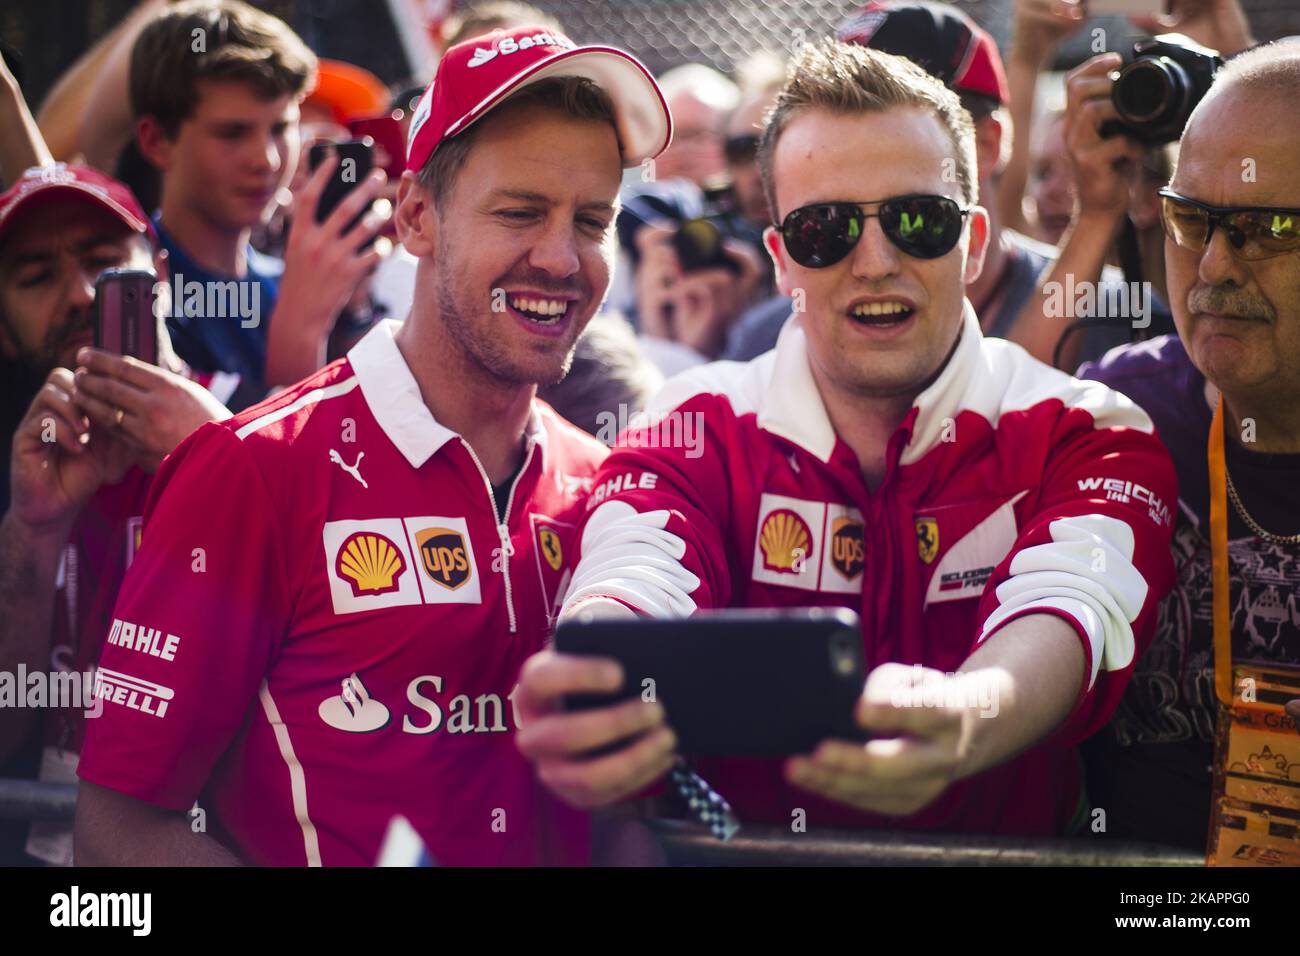 05 VETTEL Sebastian from Germany of scuderia Ferrari taking a selfie with a fan during the Formula One Belgian Grand Prix at Circuit de Spa-Francorchamps on August 24, 2017 in Spa, Belgium. (Photo by Xavier Bonilla/NurPhoto) Stock Photo